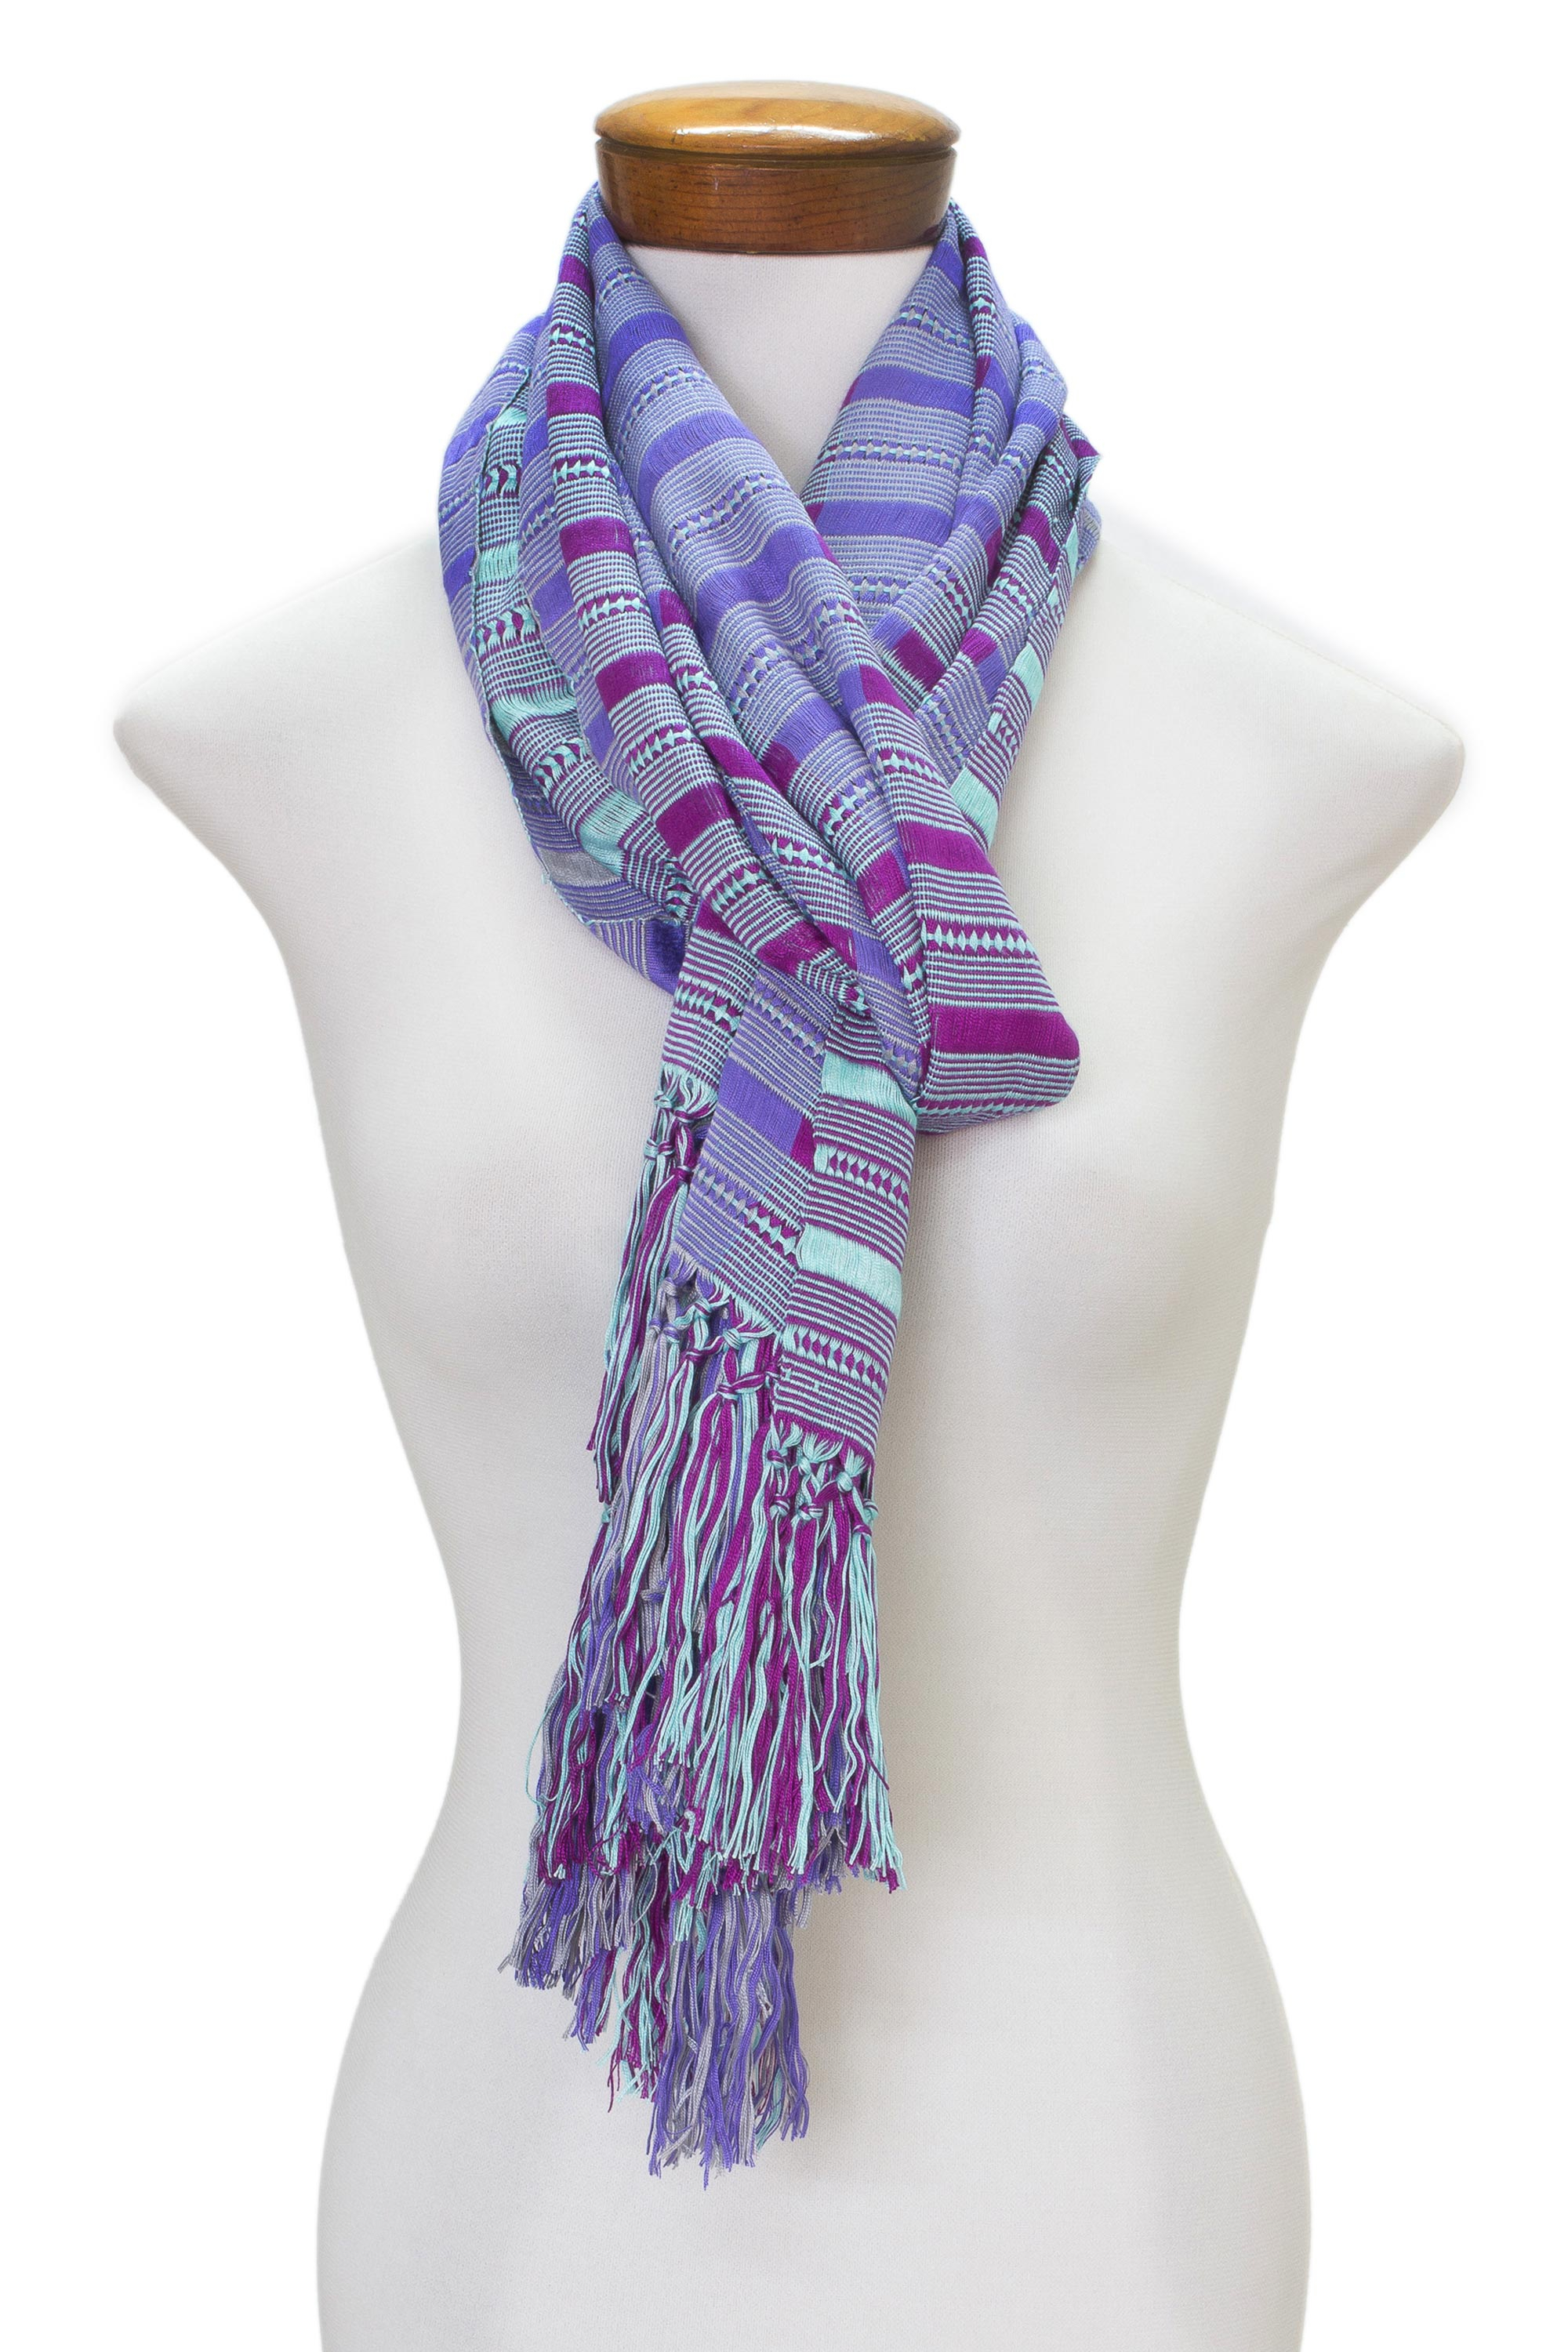 Hand Woven Striped Rayon Wrap Scarf from Guatemala - Sweet Ocean